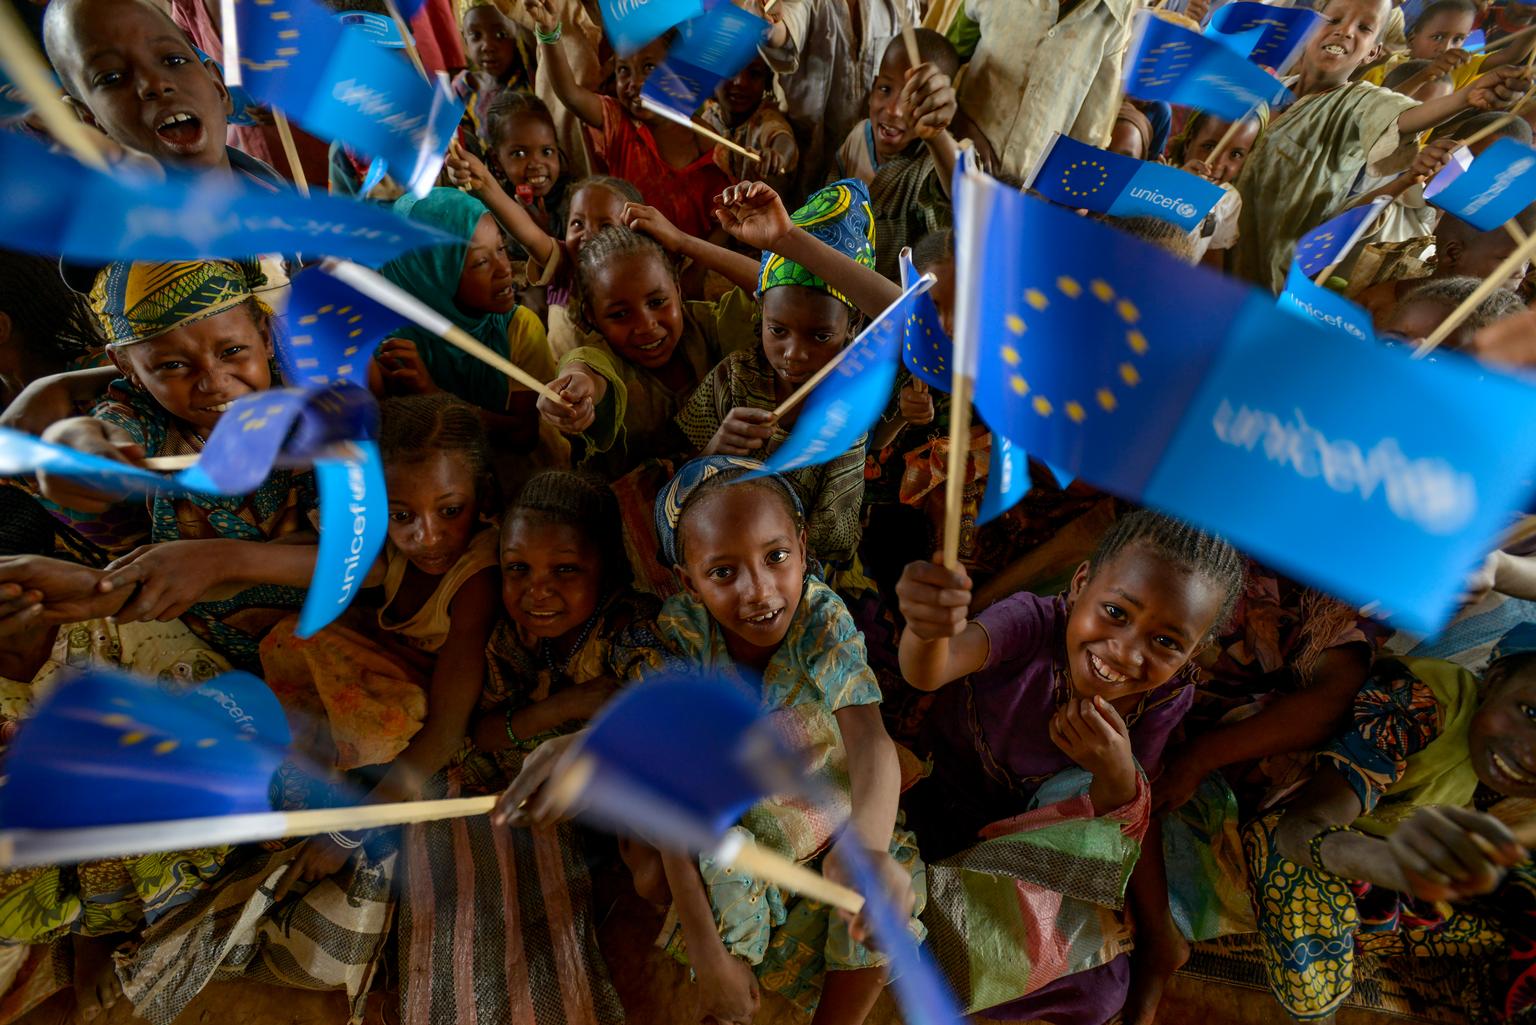 On 2 March 2015, children wave small flags with the European Union (EU) and UNICEF logos in a primary-school